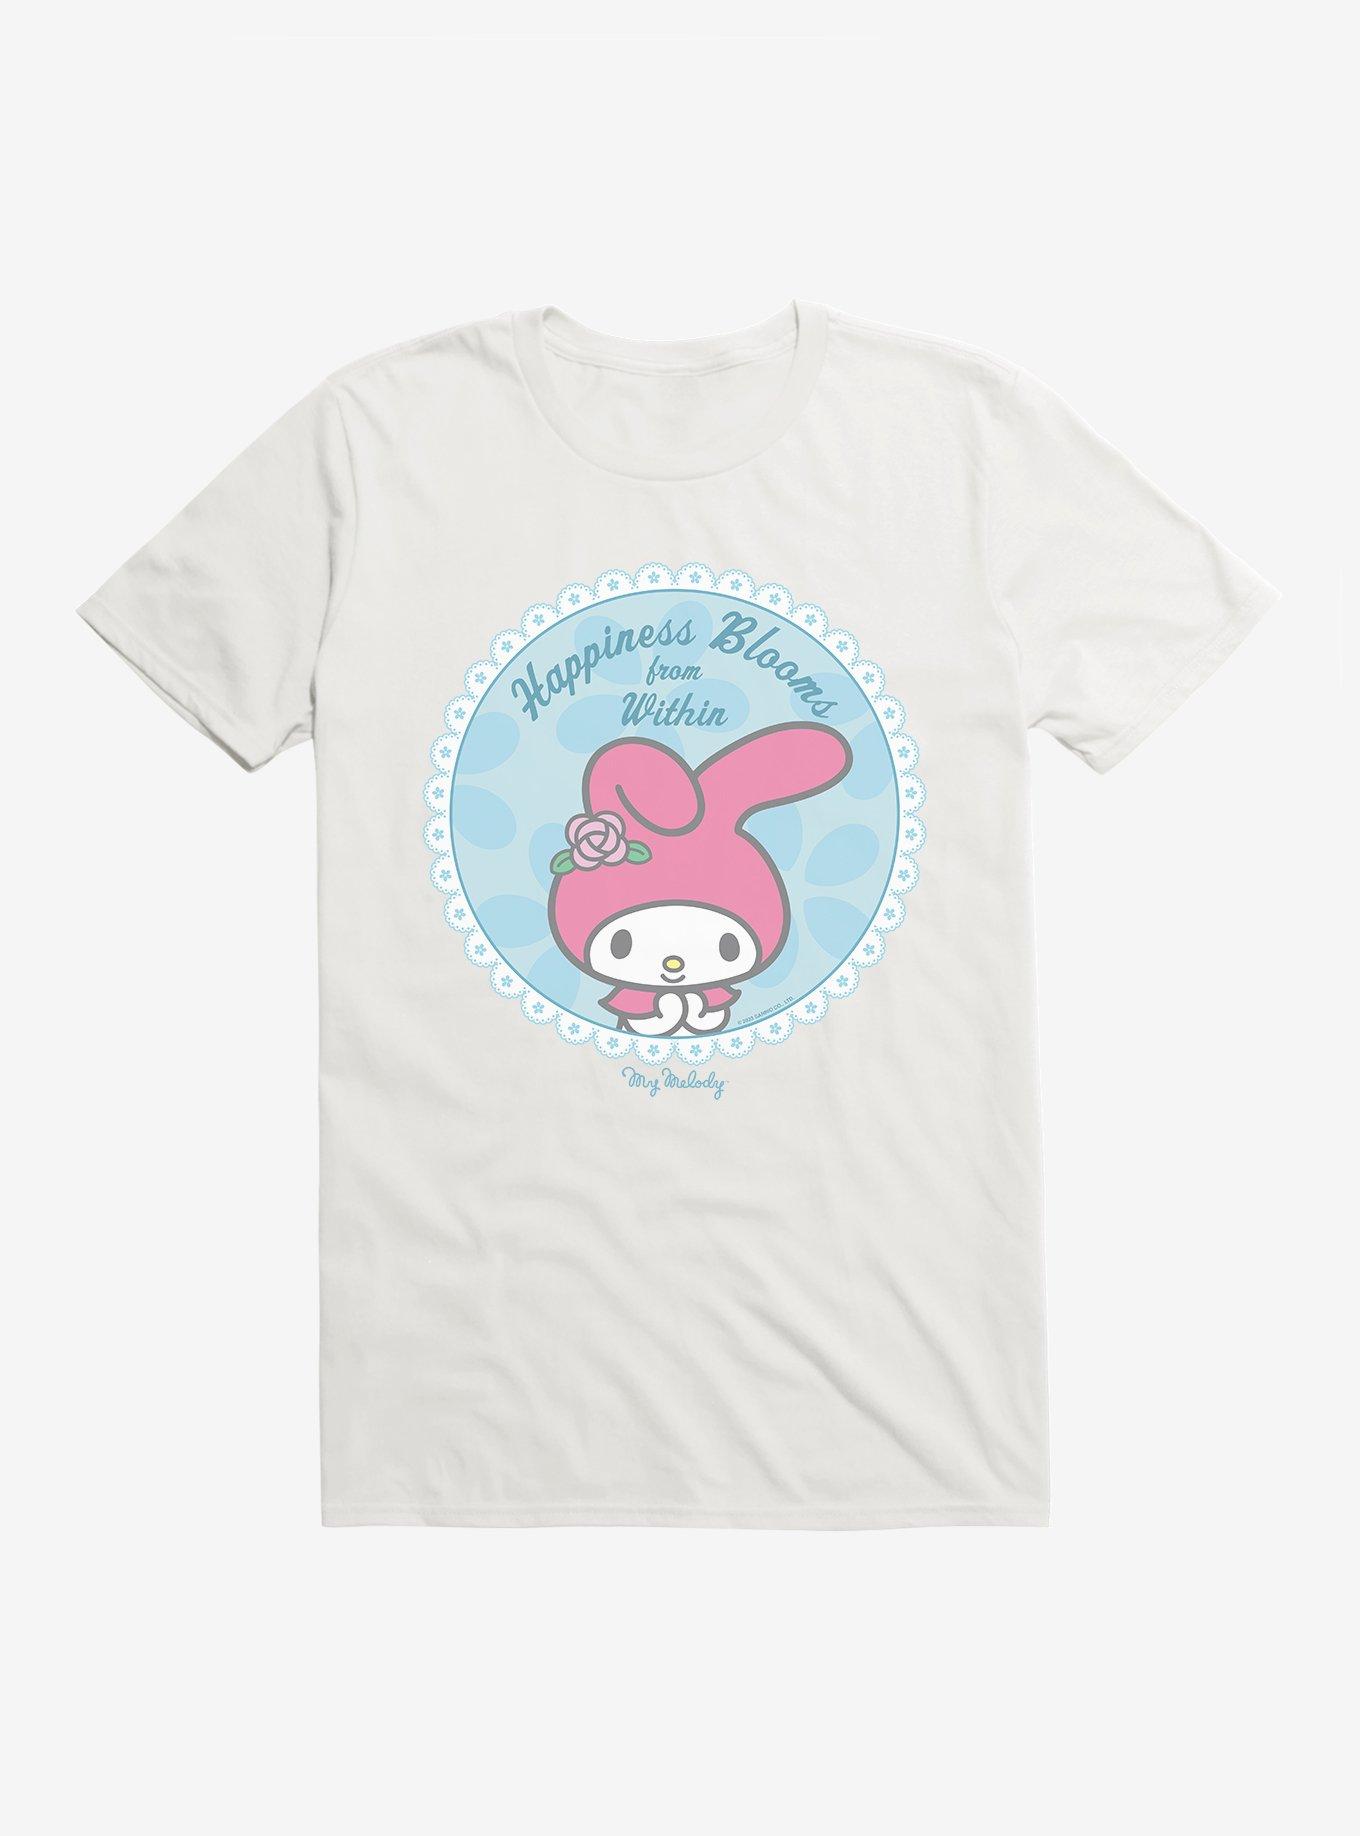 My Melody Happiness Blooms From Within T-Shirt